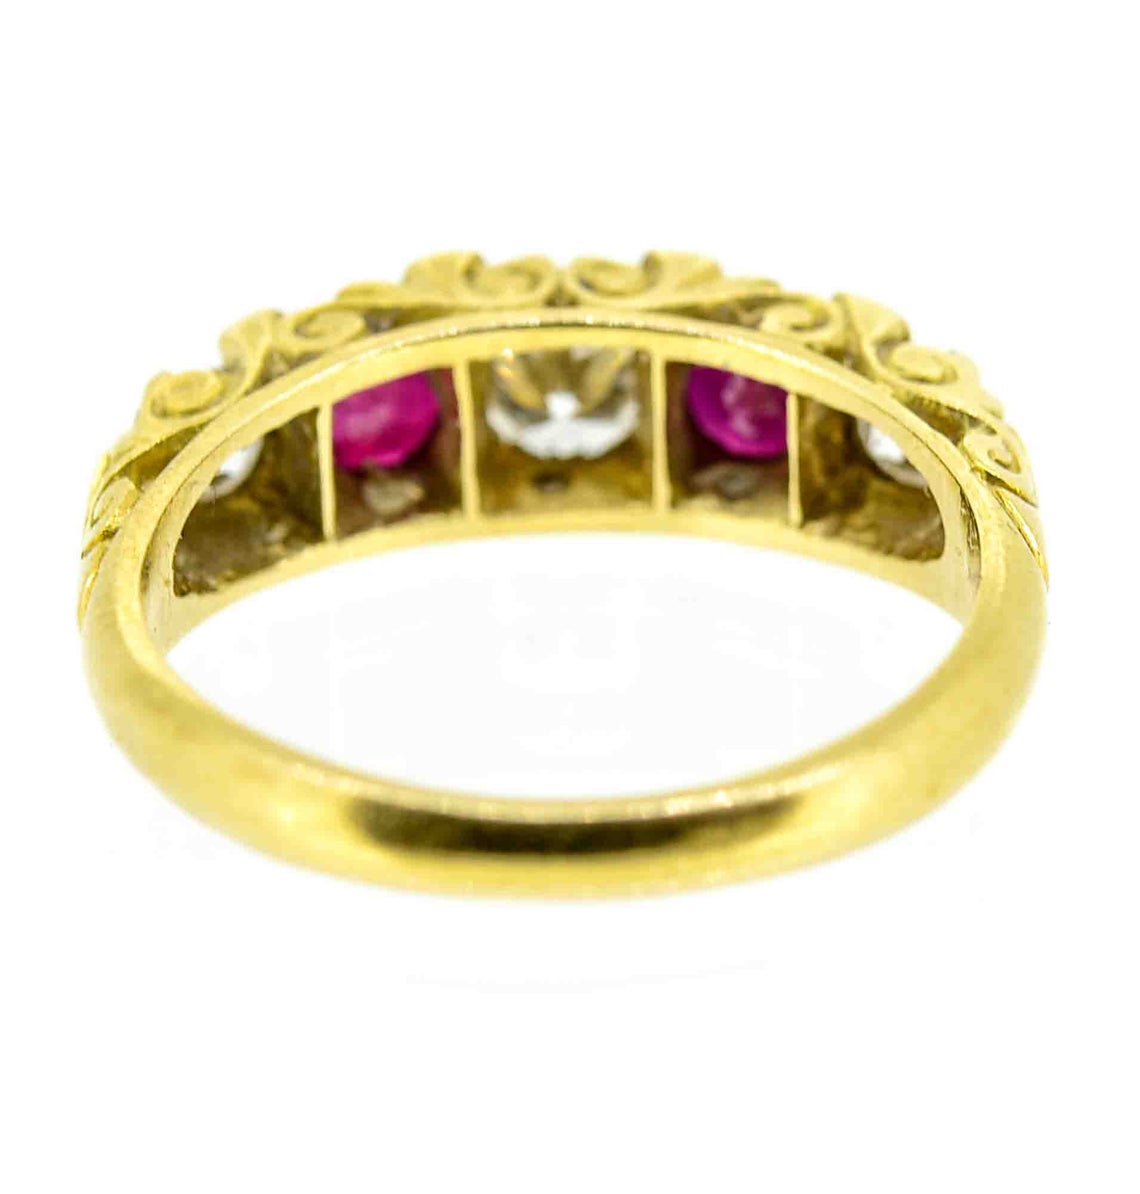 Antique Style 18ct Yellow Gold Ruby and Diamond Five Stone Ring